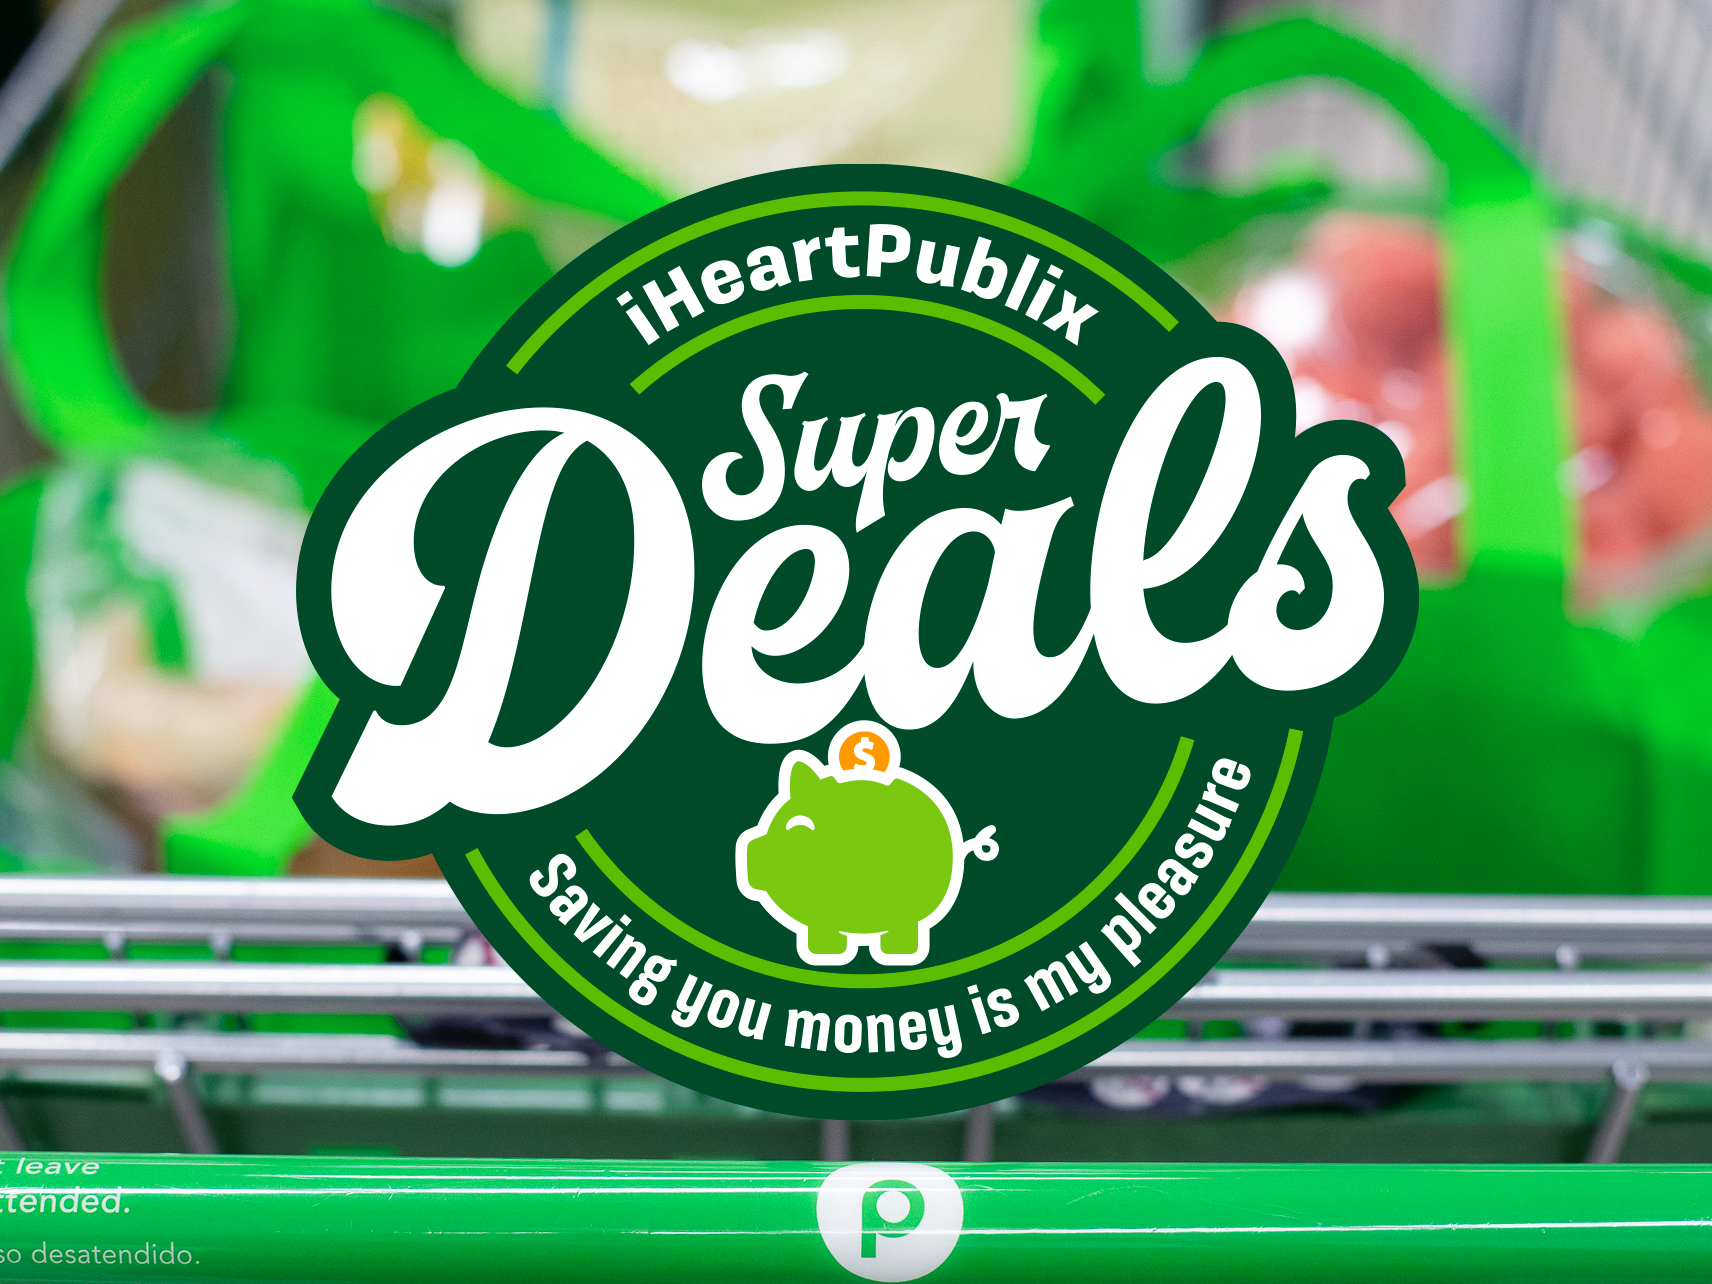 Publix Super Deals Week Of 6/16 to 6/22 (6/15 to 6/21 For Some)